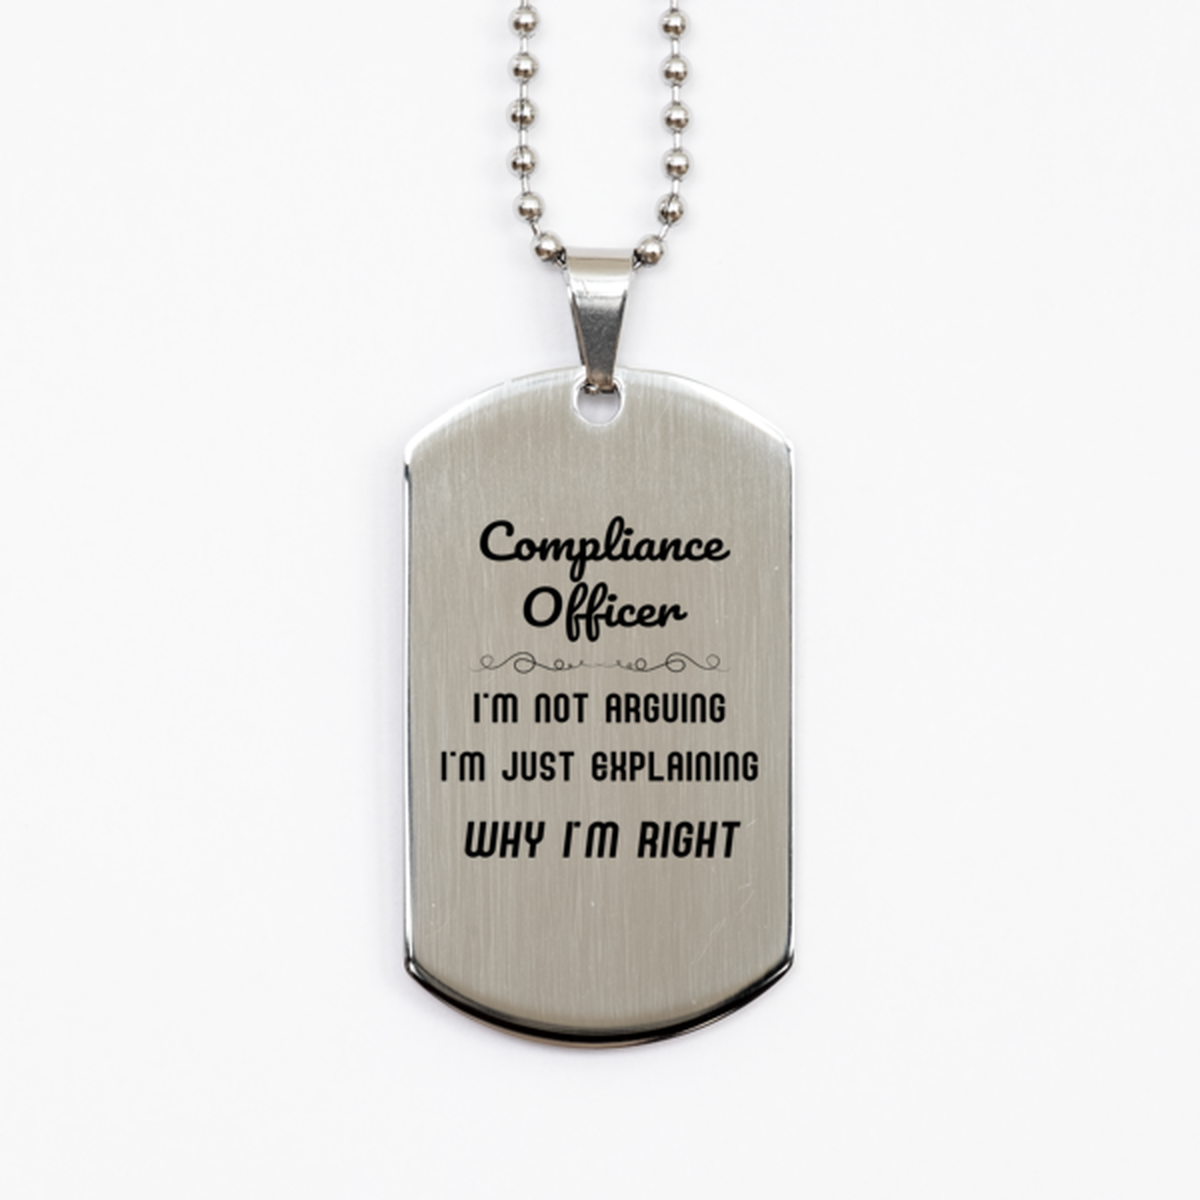 Compliance Officer I'm not Arguing. I'm Just Explaining Why I'm RIGHT Silver Dog Tag, Funny Saying Quote Compliance Officer Gifts For Compliance Officer Graduation Birthday Christmas Gifts for Men Women Coworker